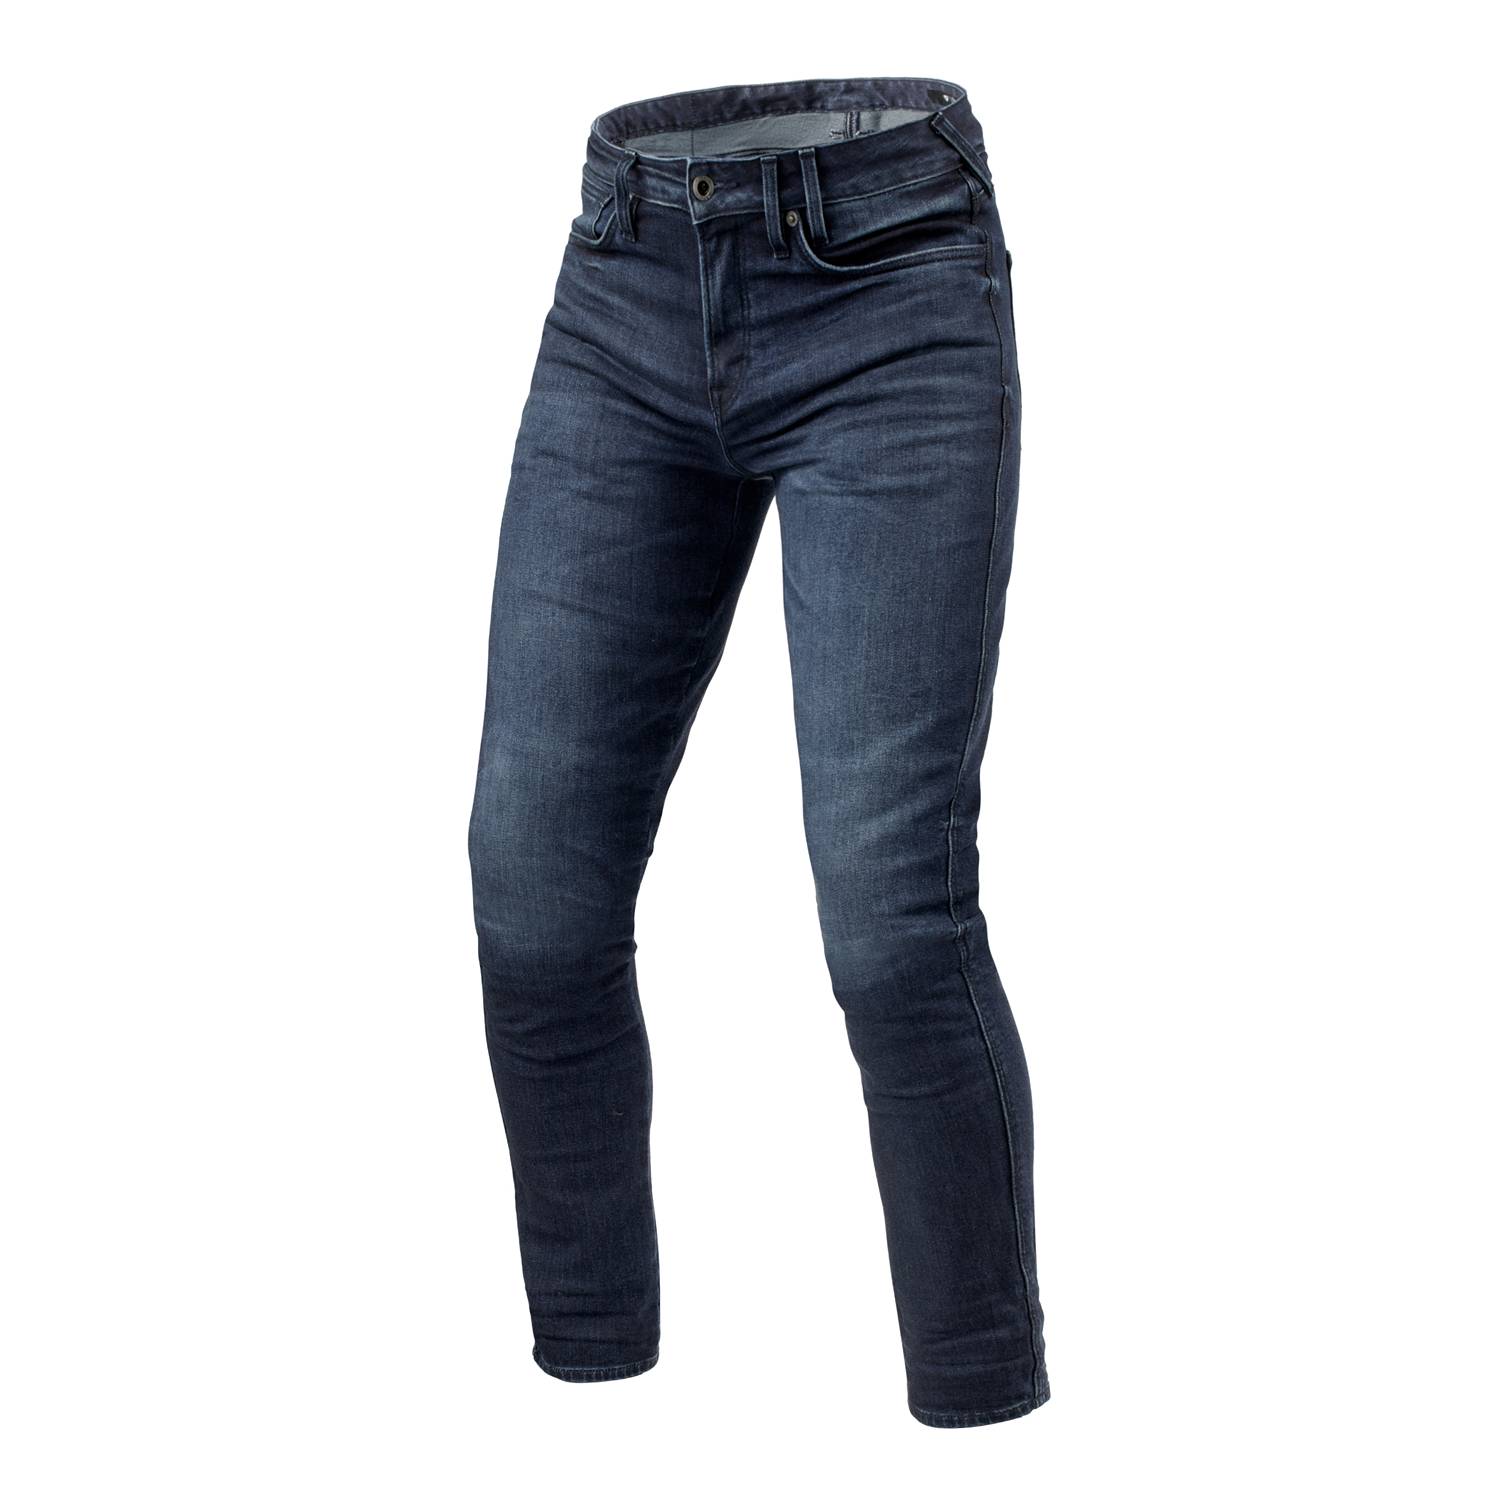 Image of REV'IT! Jeans Carlin SK Dark Blue Used L34 Motorcycle Jeans Size L34/W28 ID 8700001376372